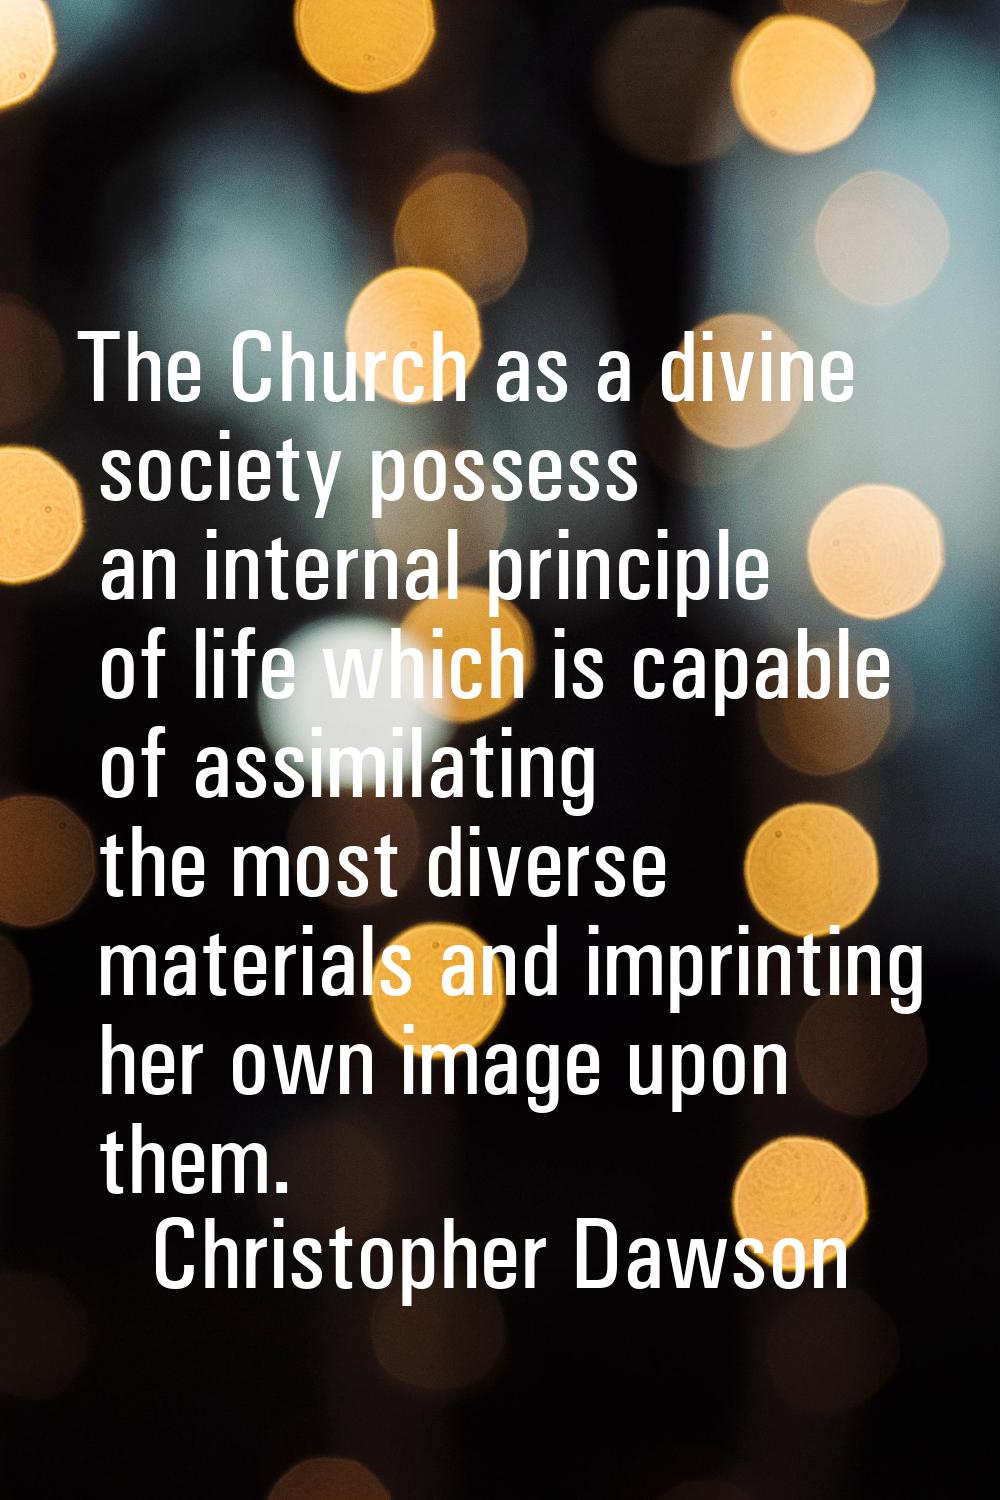 The Church as a divine society possess an internal principle of life which is capable of assimilati